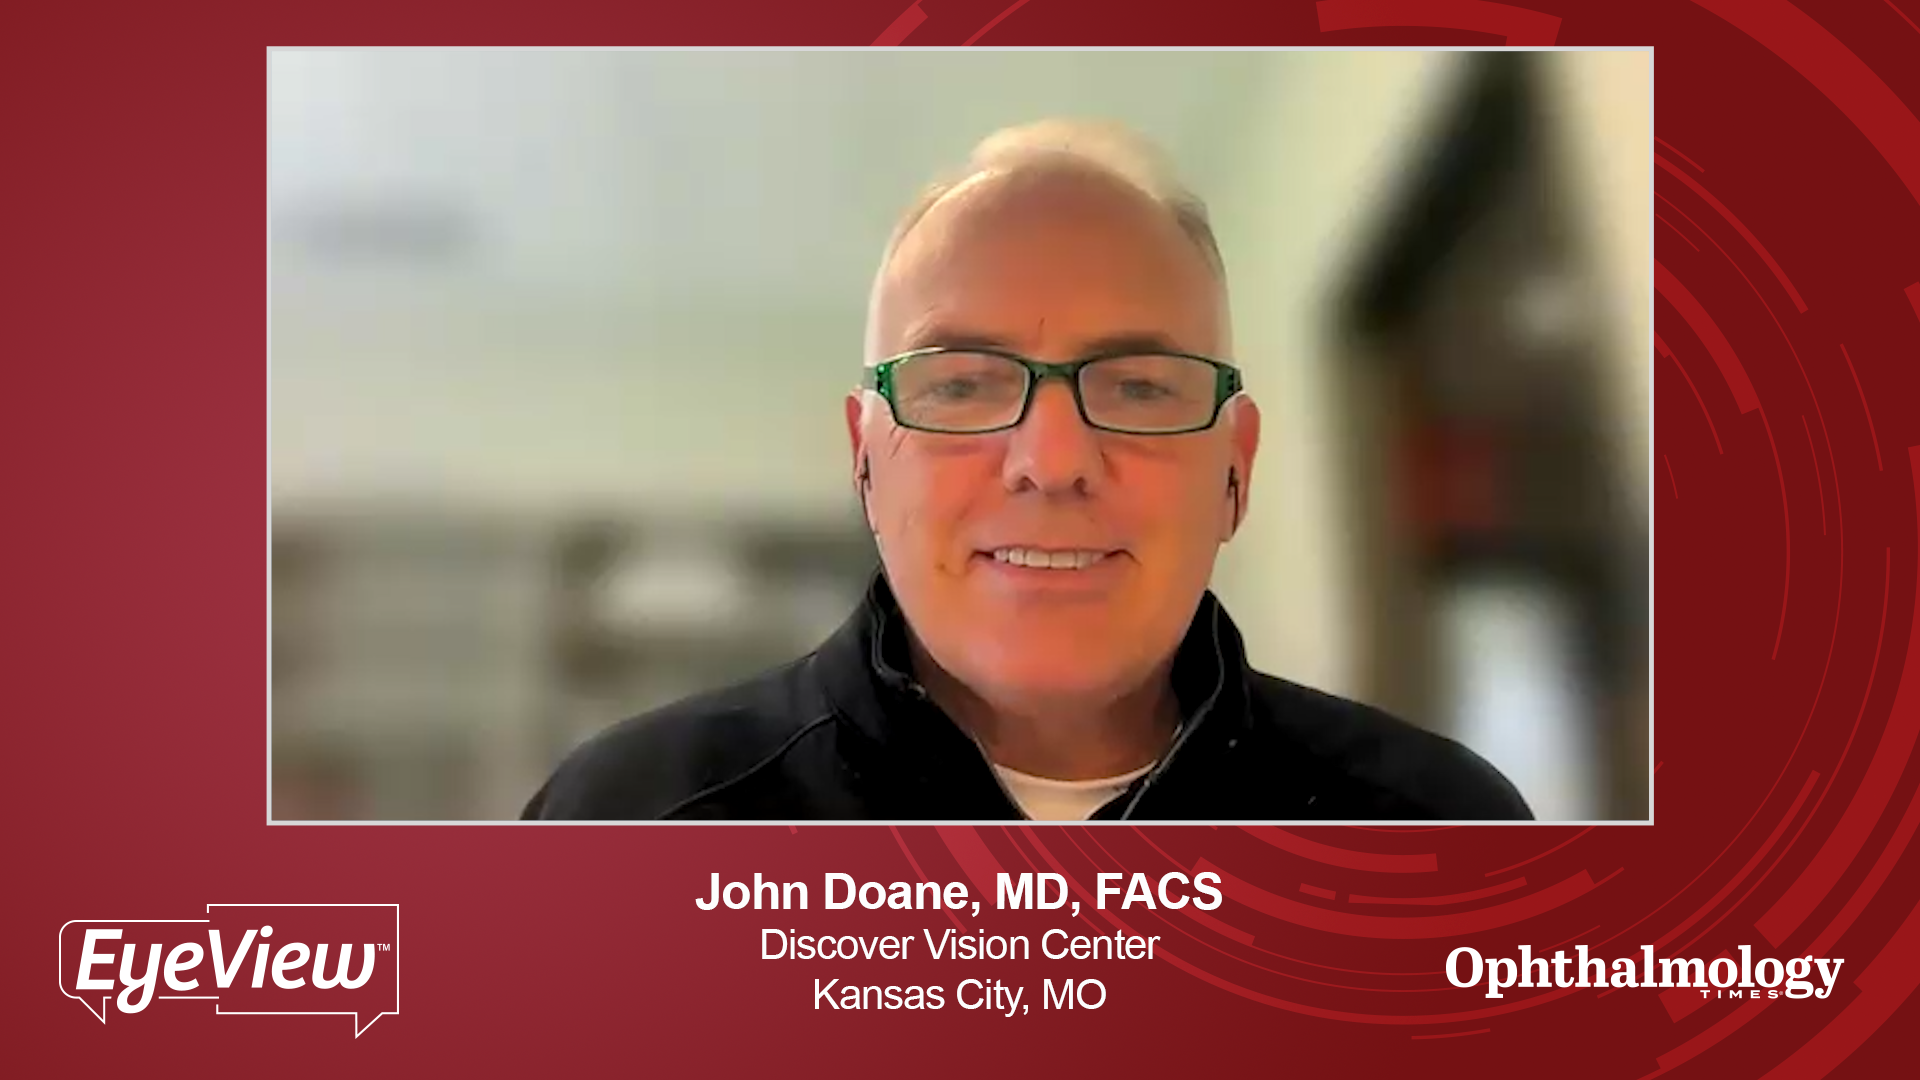 Video 2 - 1 KOL is featured in, "Advances in Technology for SMILE procedure"